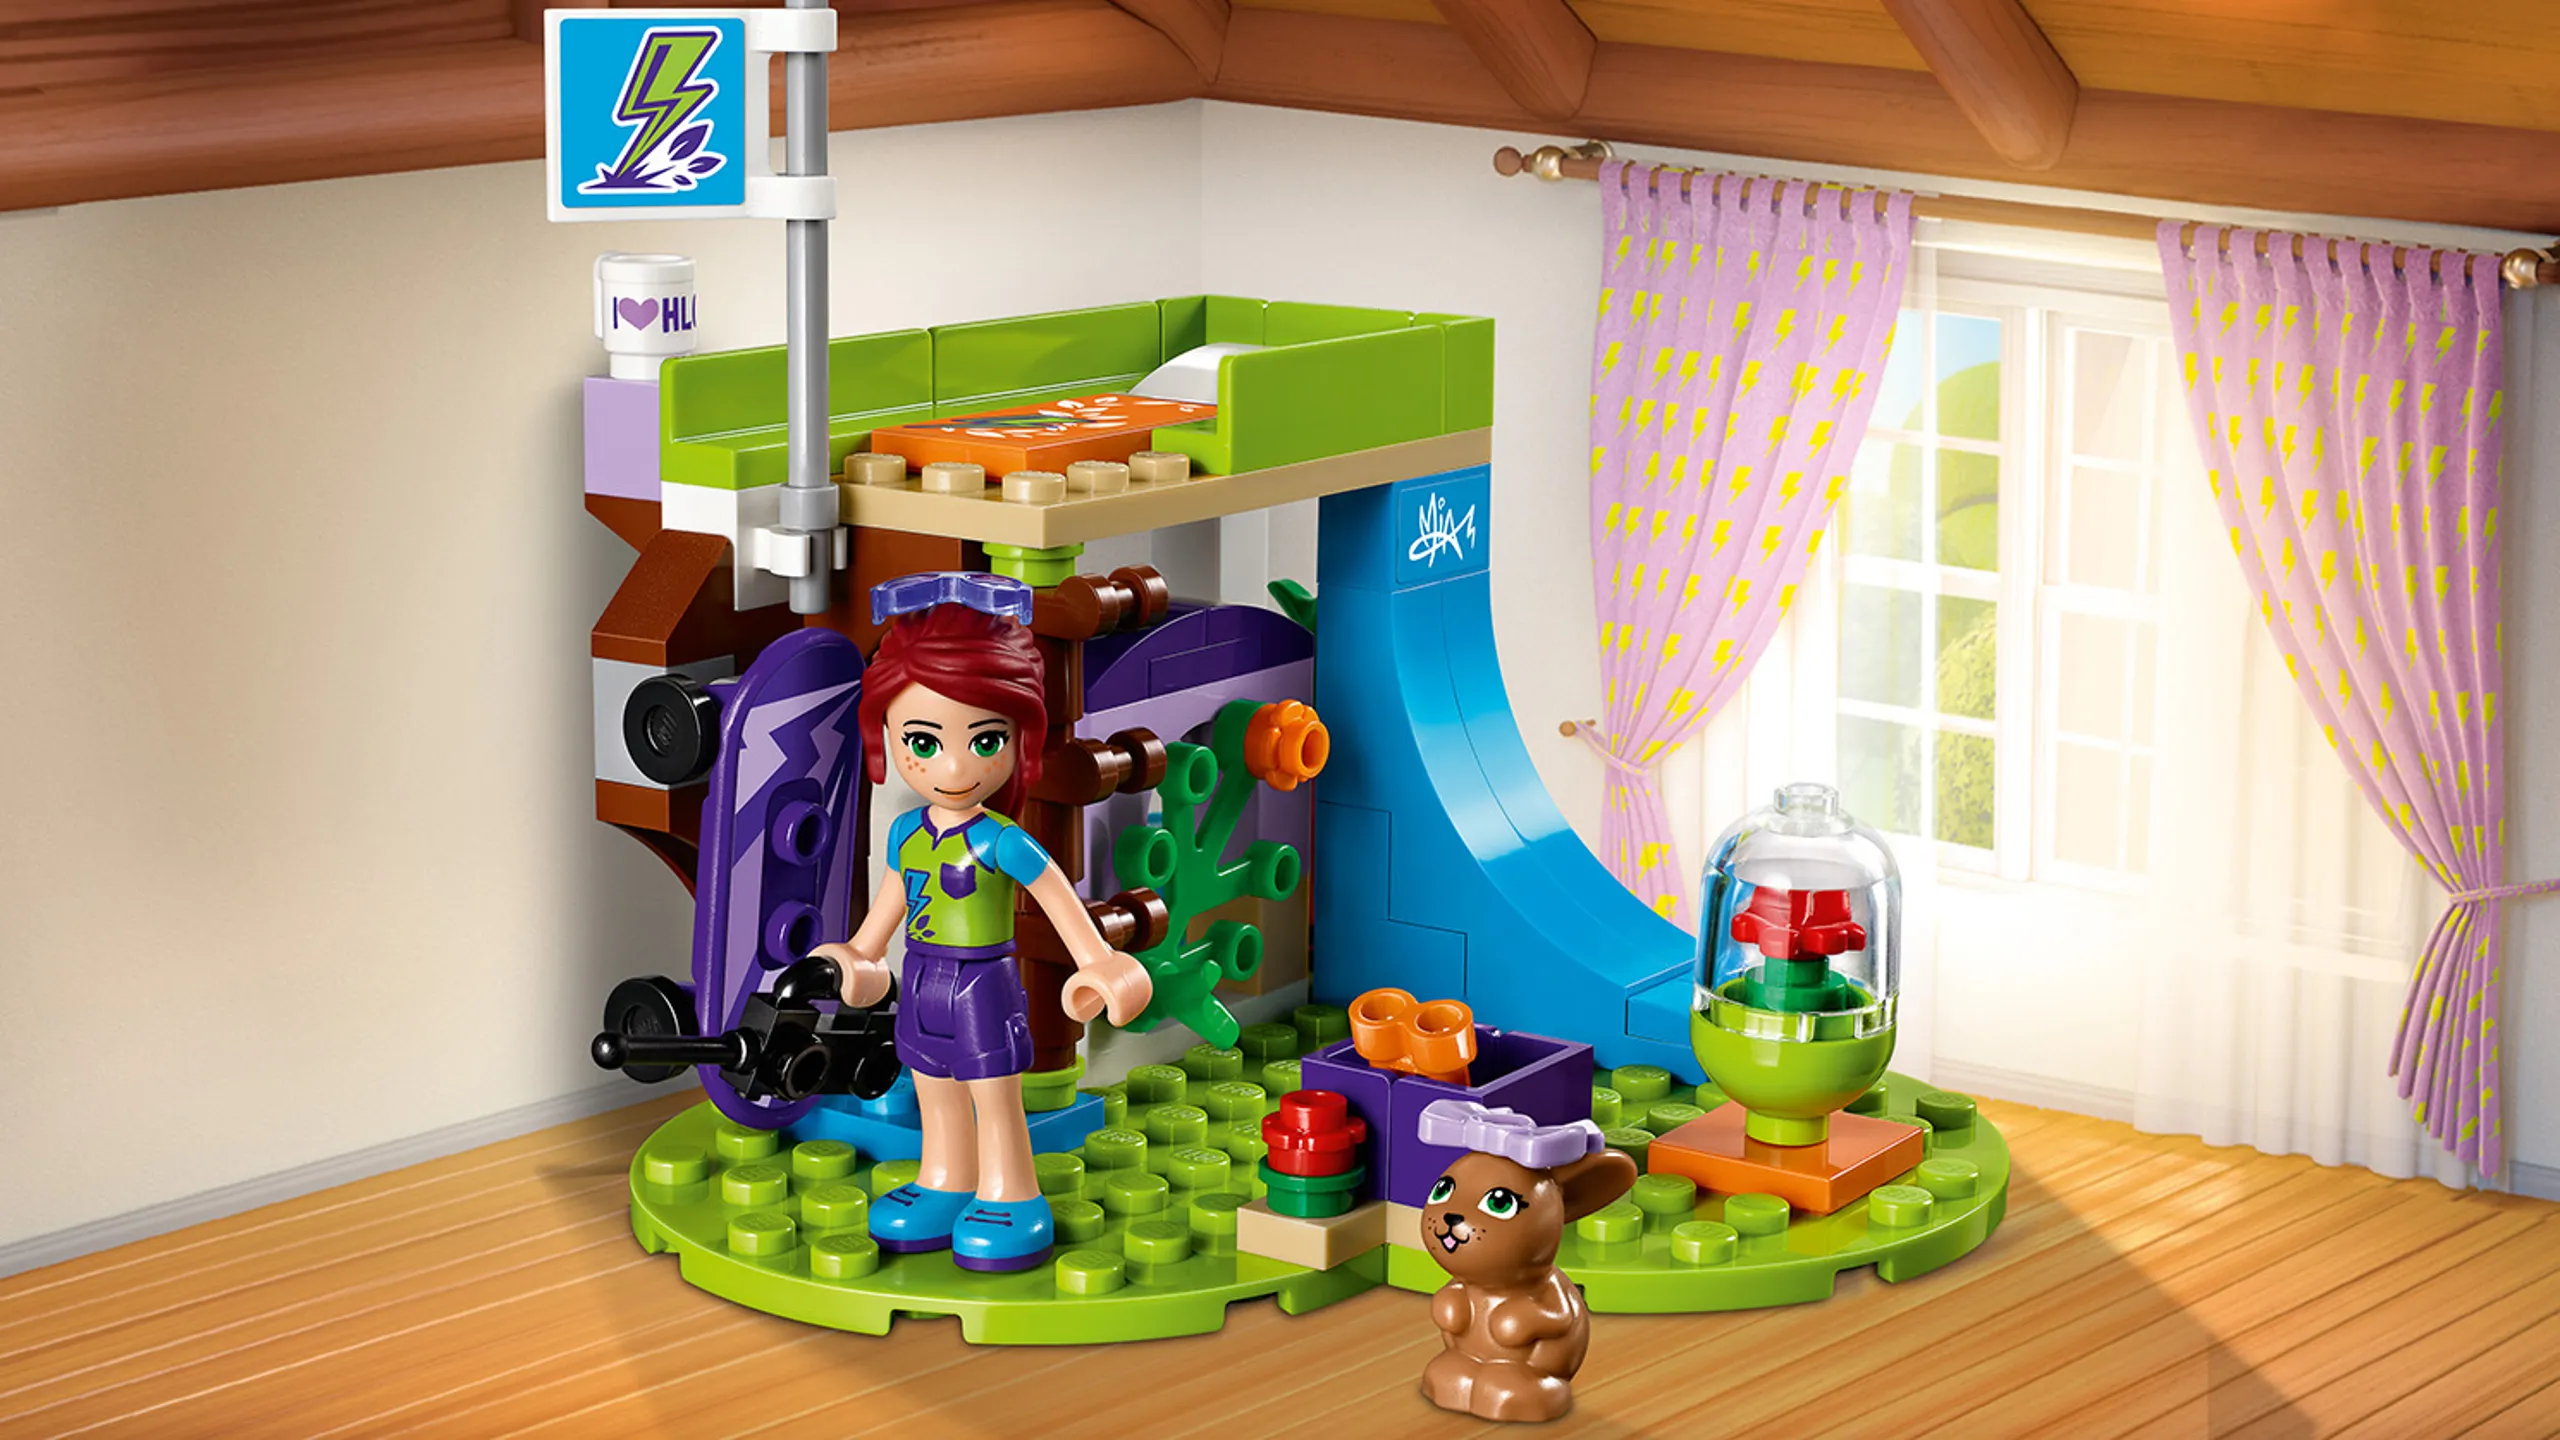 LEGO Friends Mia's Bedroom - 41327 - Jump on the skateboard and practice your skills on the ramp. Have fun with her pet bunny Twister! 